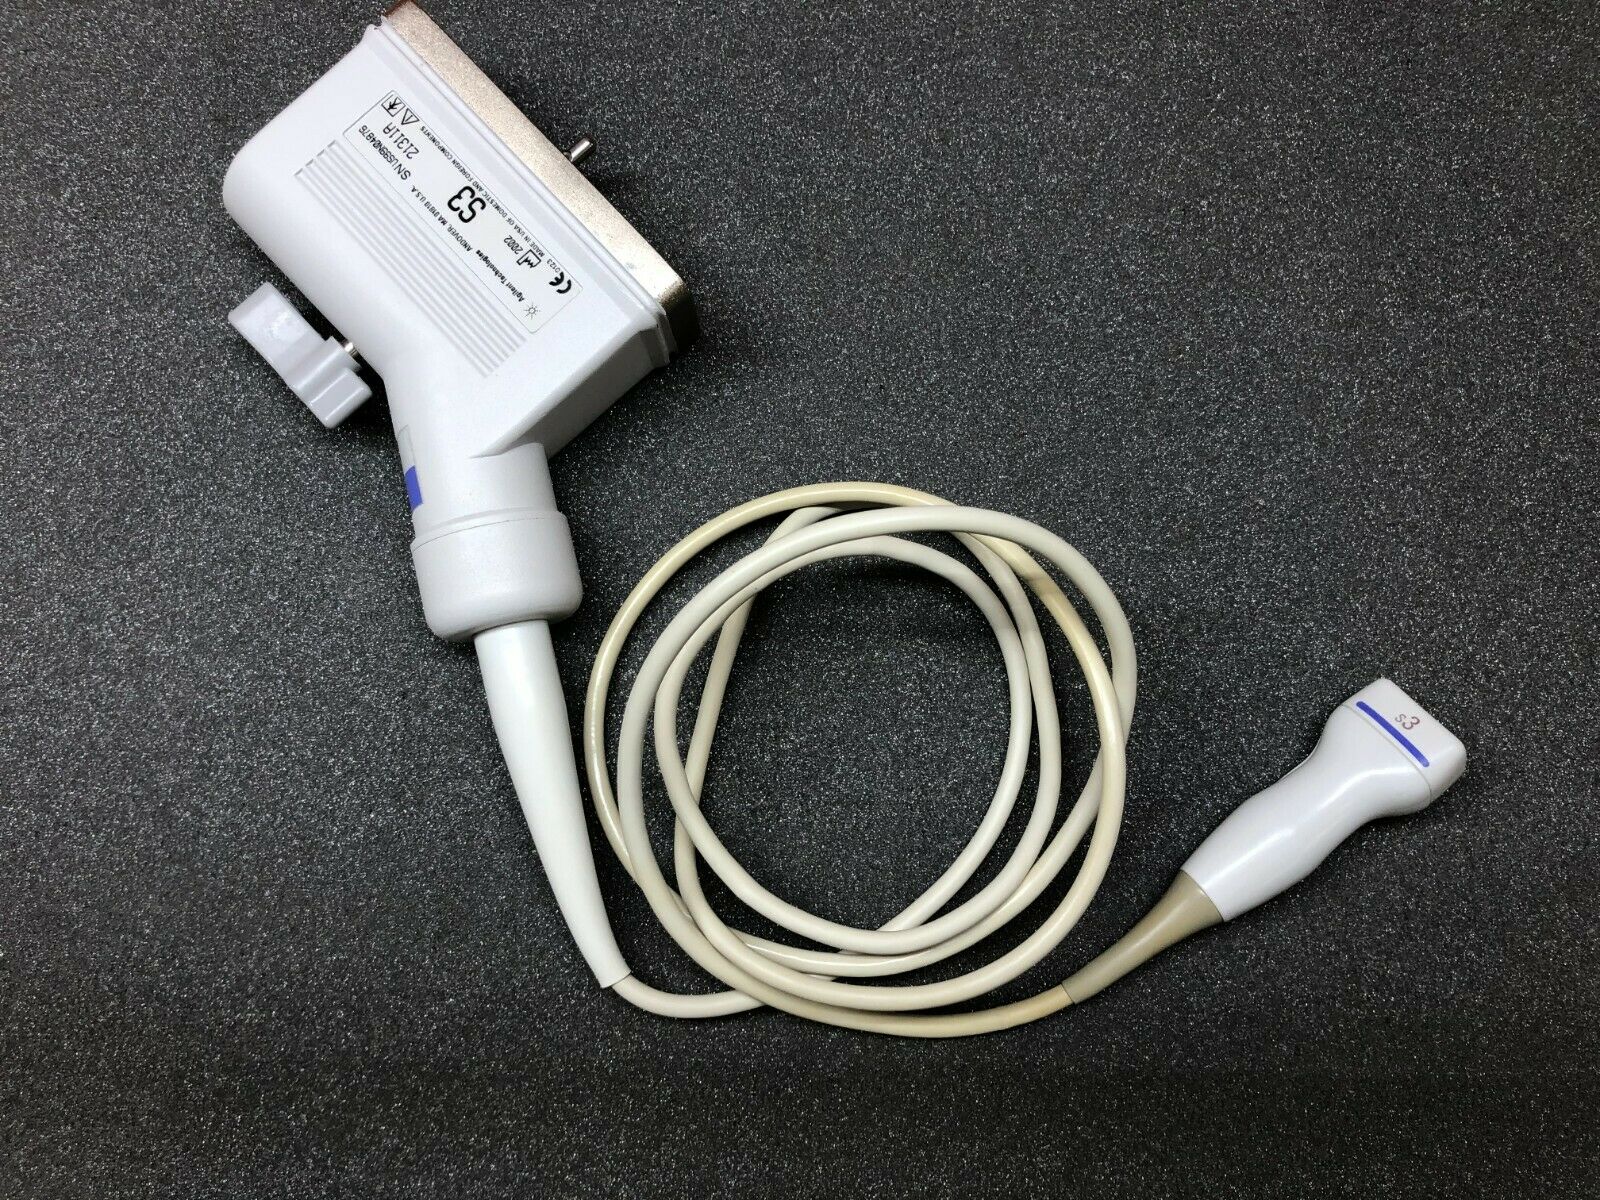 HP 21311A S3 Phased Array Ultrasound Transducer Probe